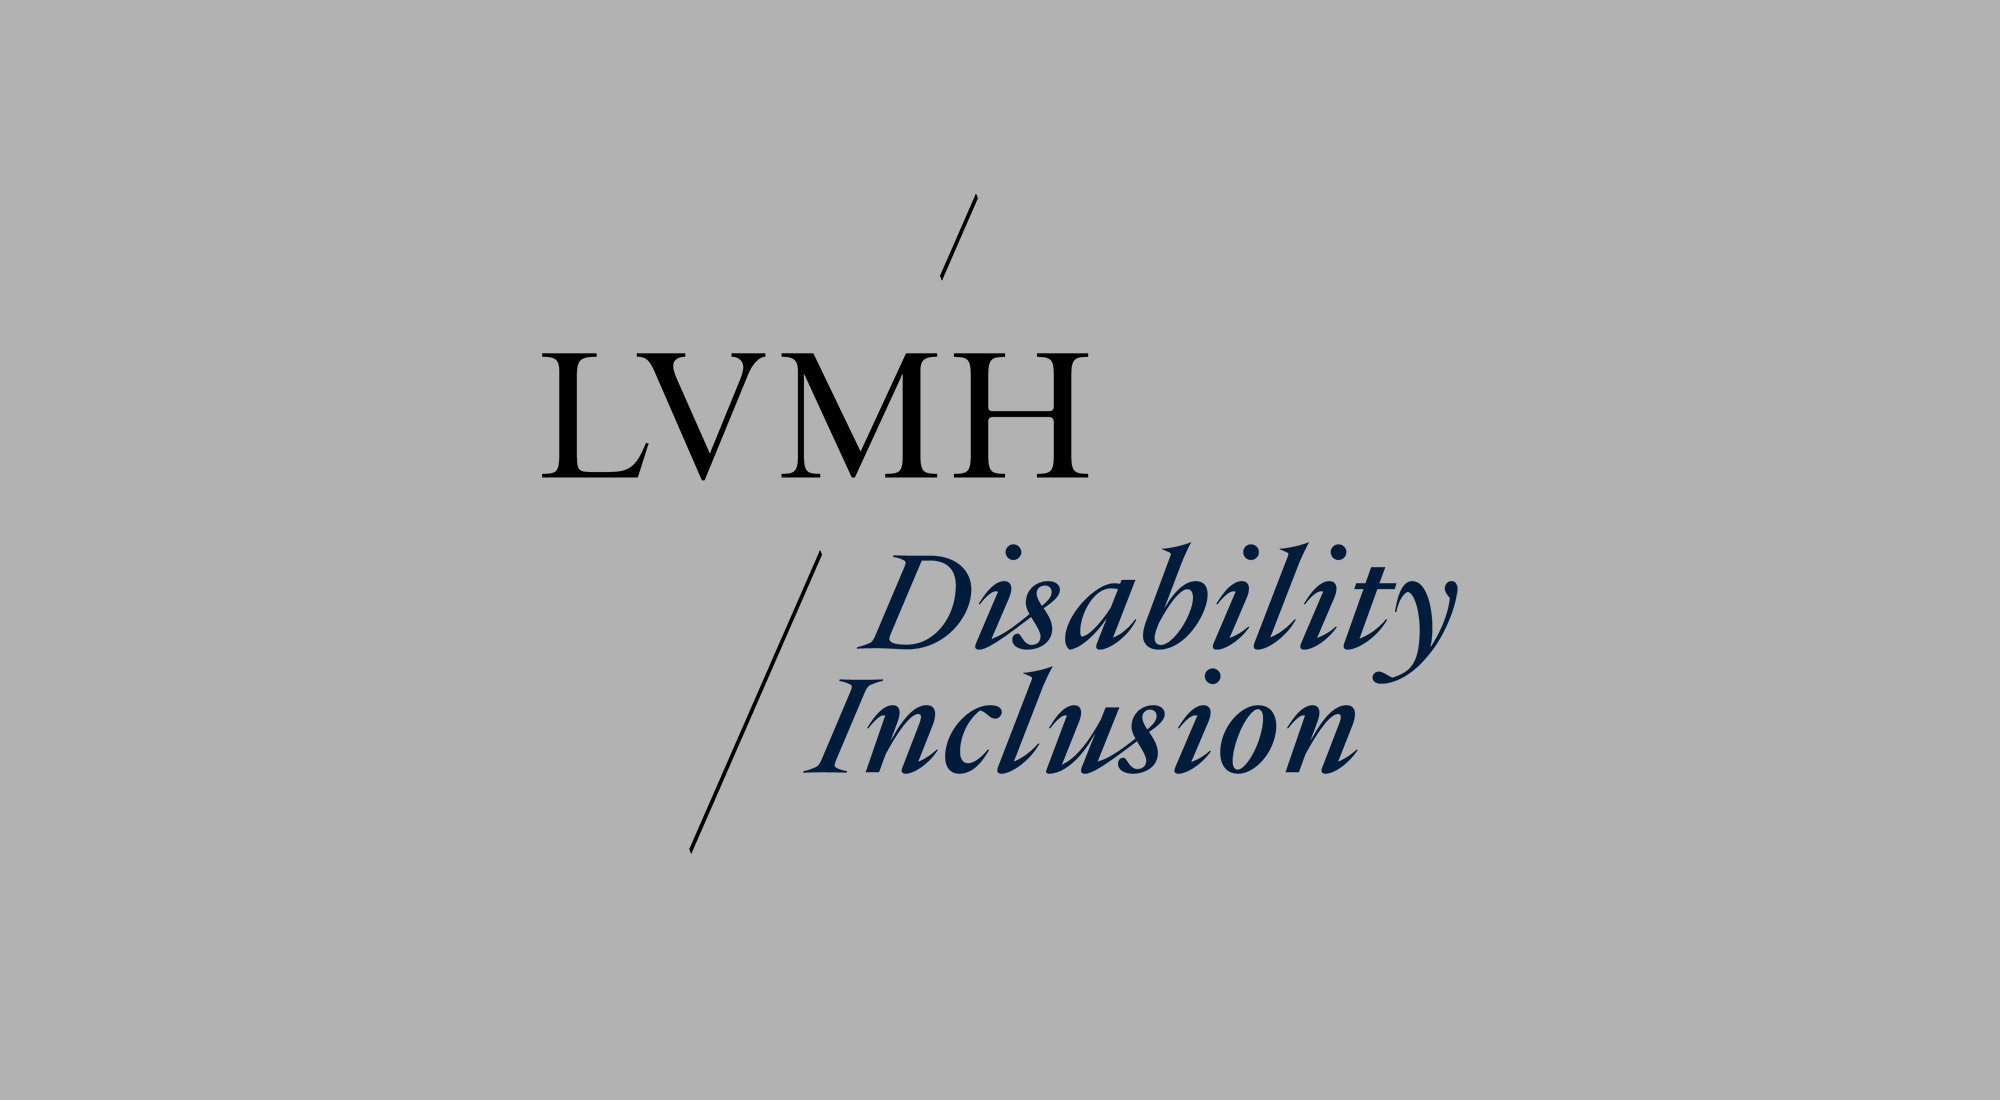 LVMH - Support for people with disabilities, whether temporary or